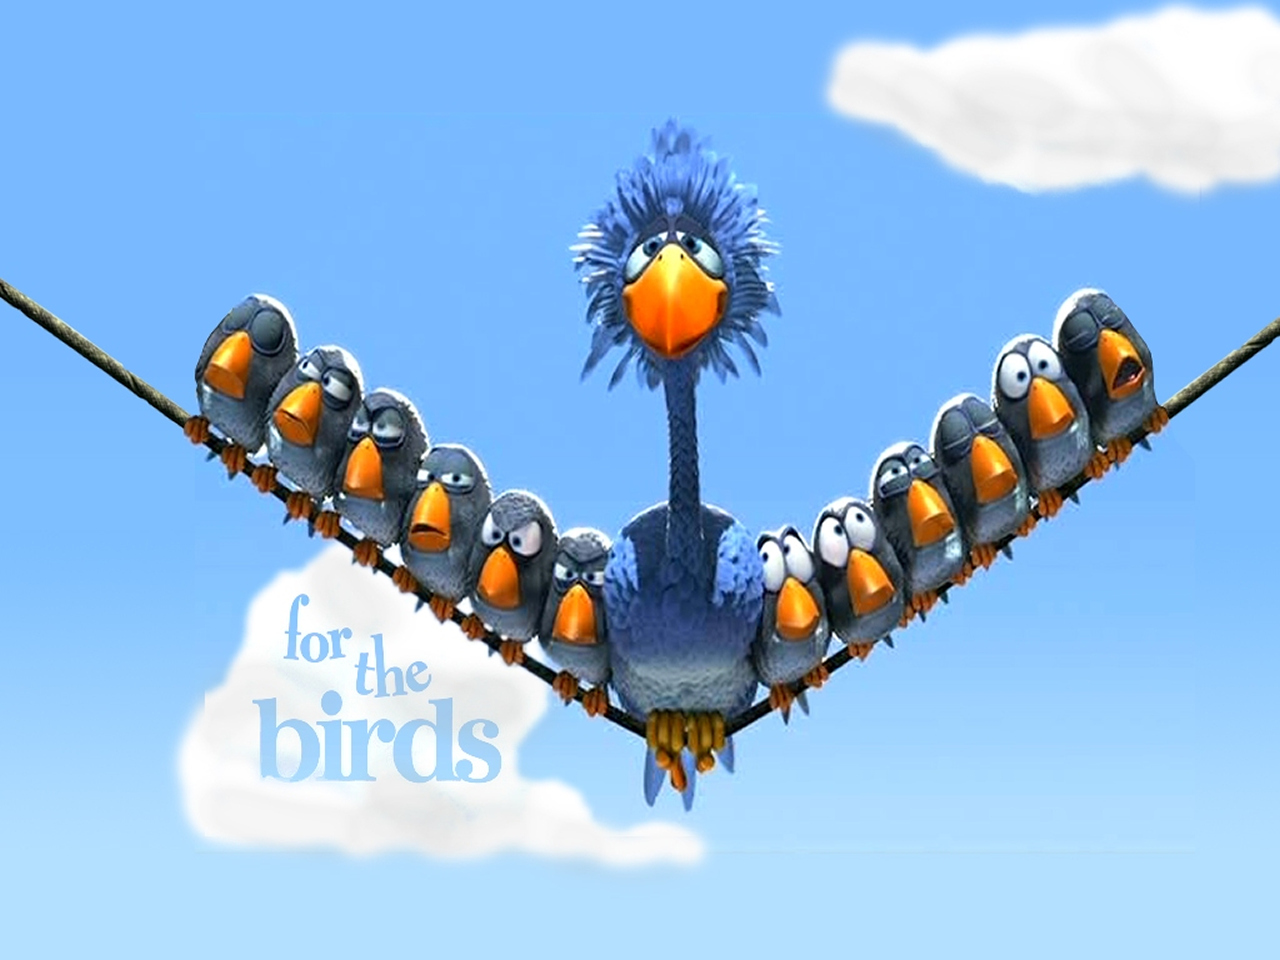 "For the Birds" (the Pixar short film shown at the cinema with "Monsters, Inc.") desktop wallpaper (1280 x 960 pixels)